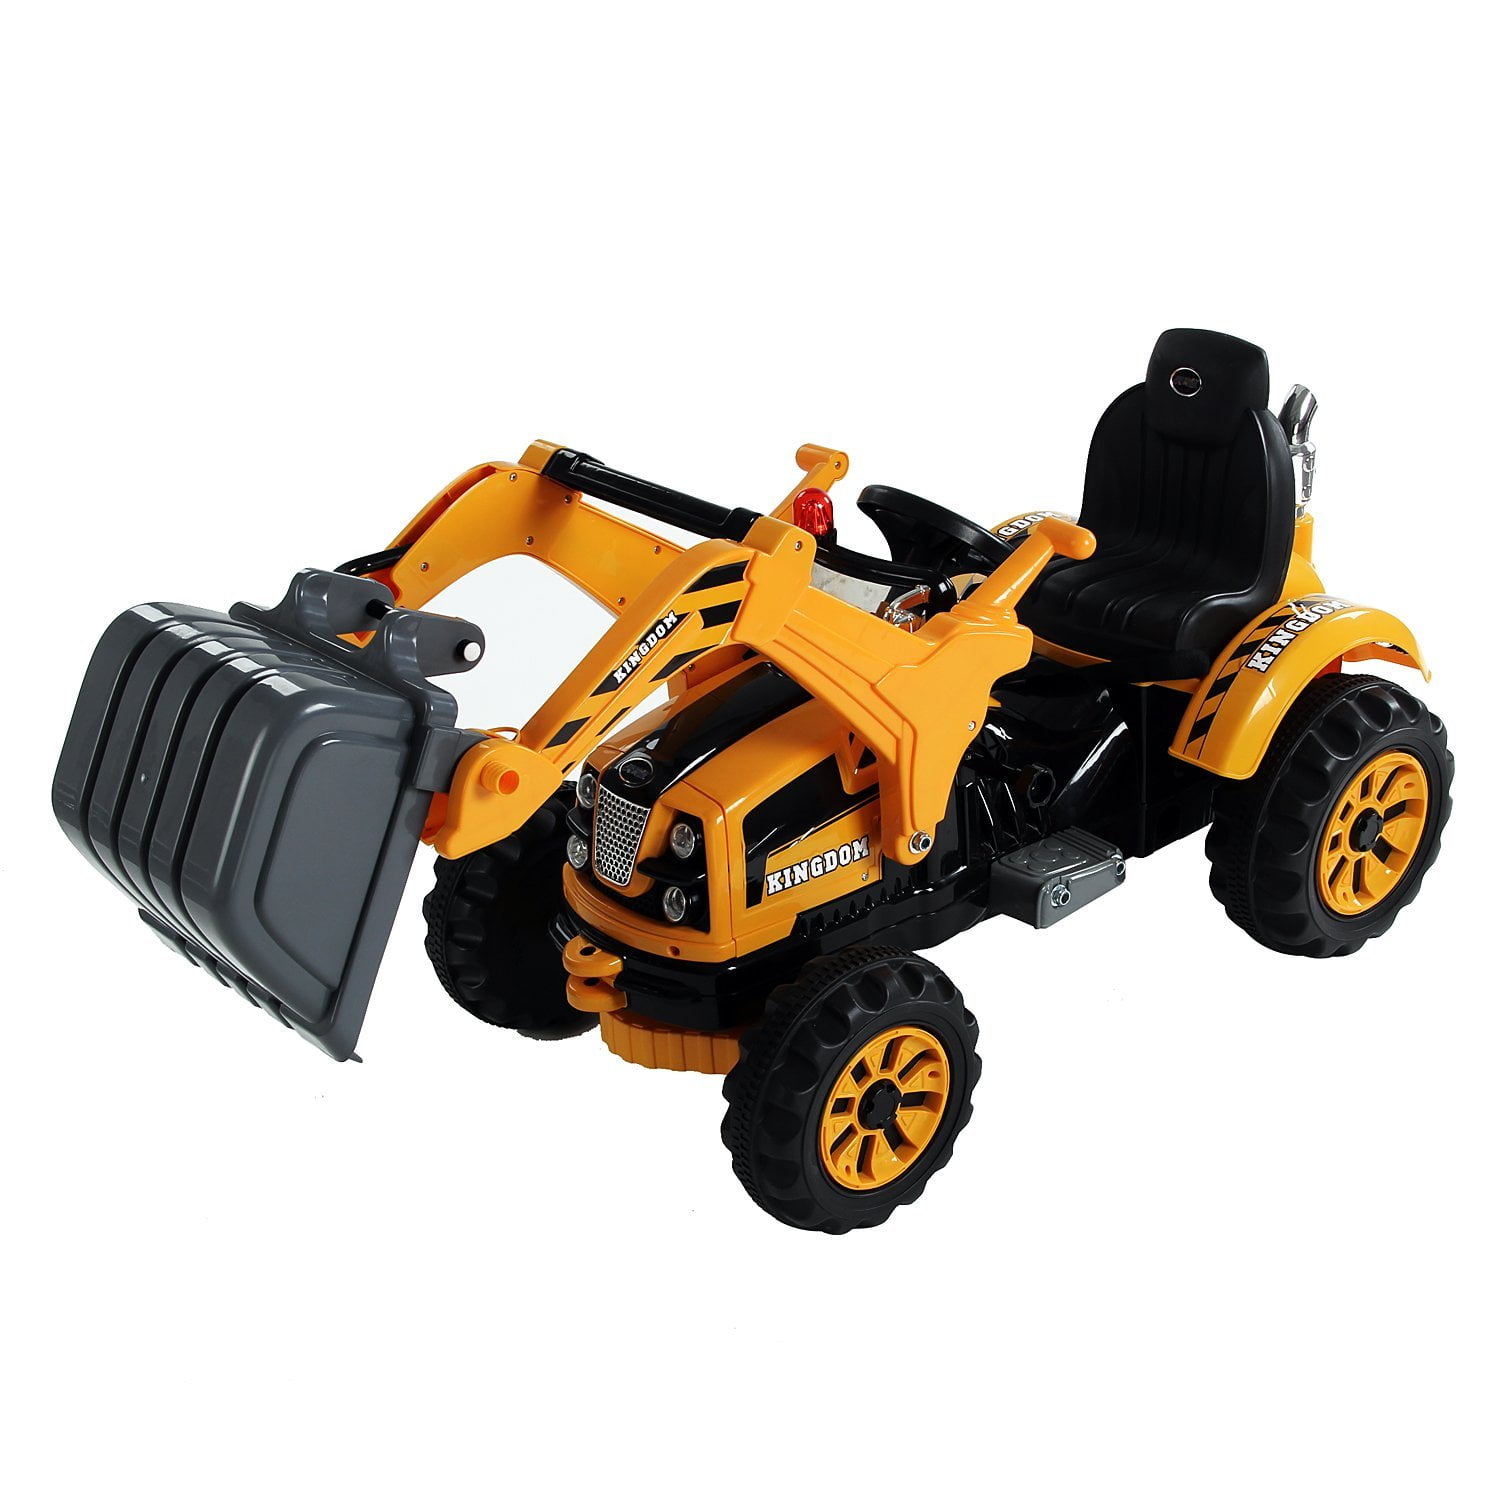 Details about   Kids Toddler Ride On Excavator Digger Truck Scooter w/ Sound & Seat Storage Toy 